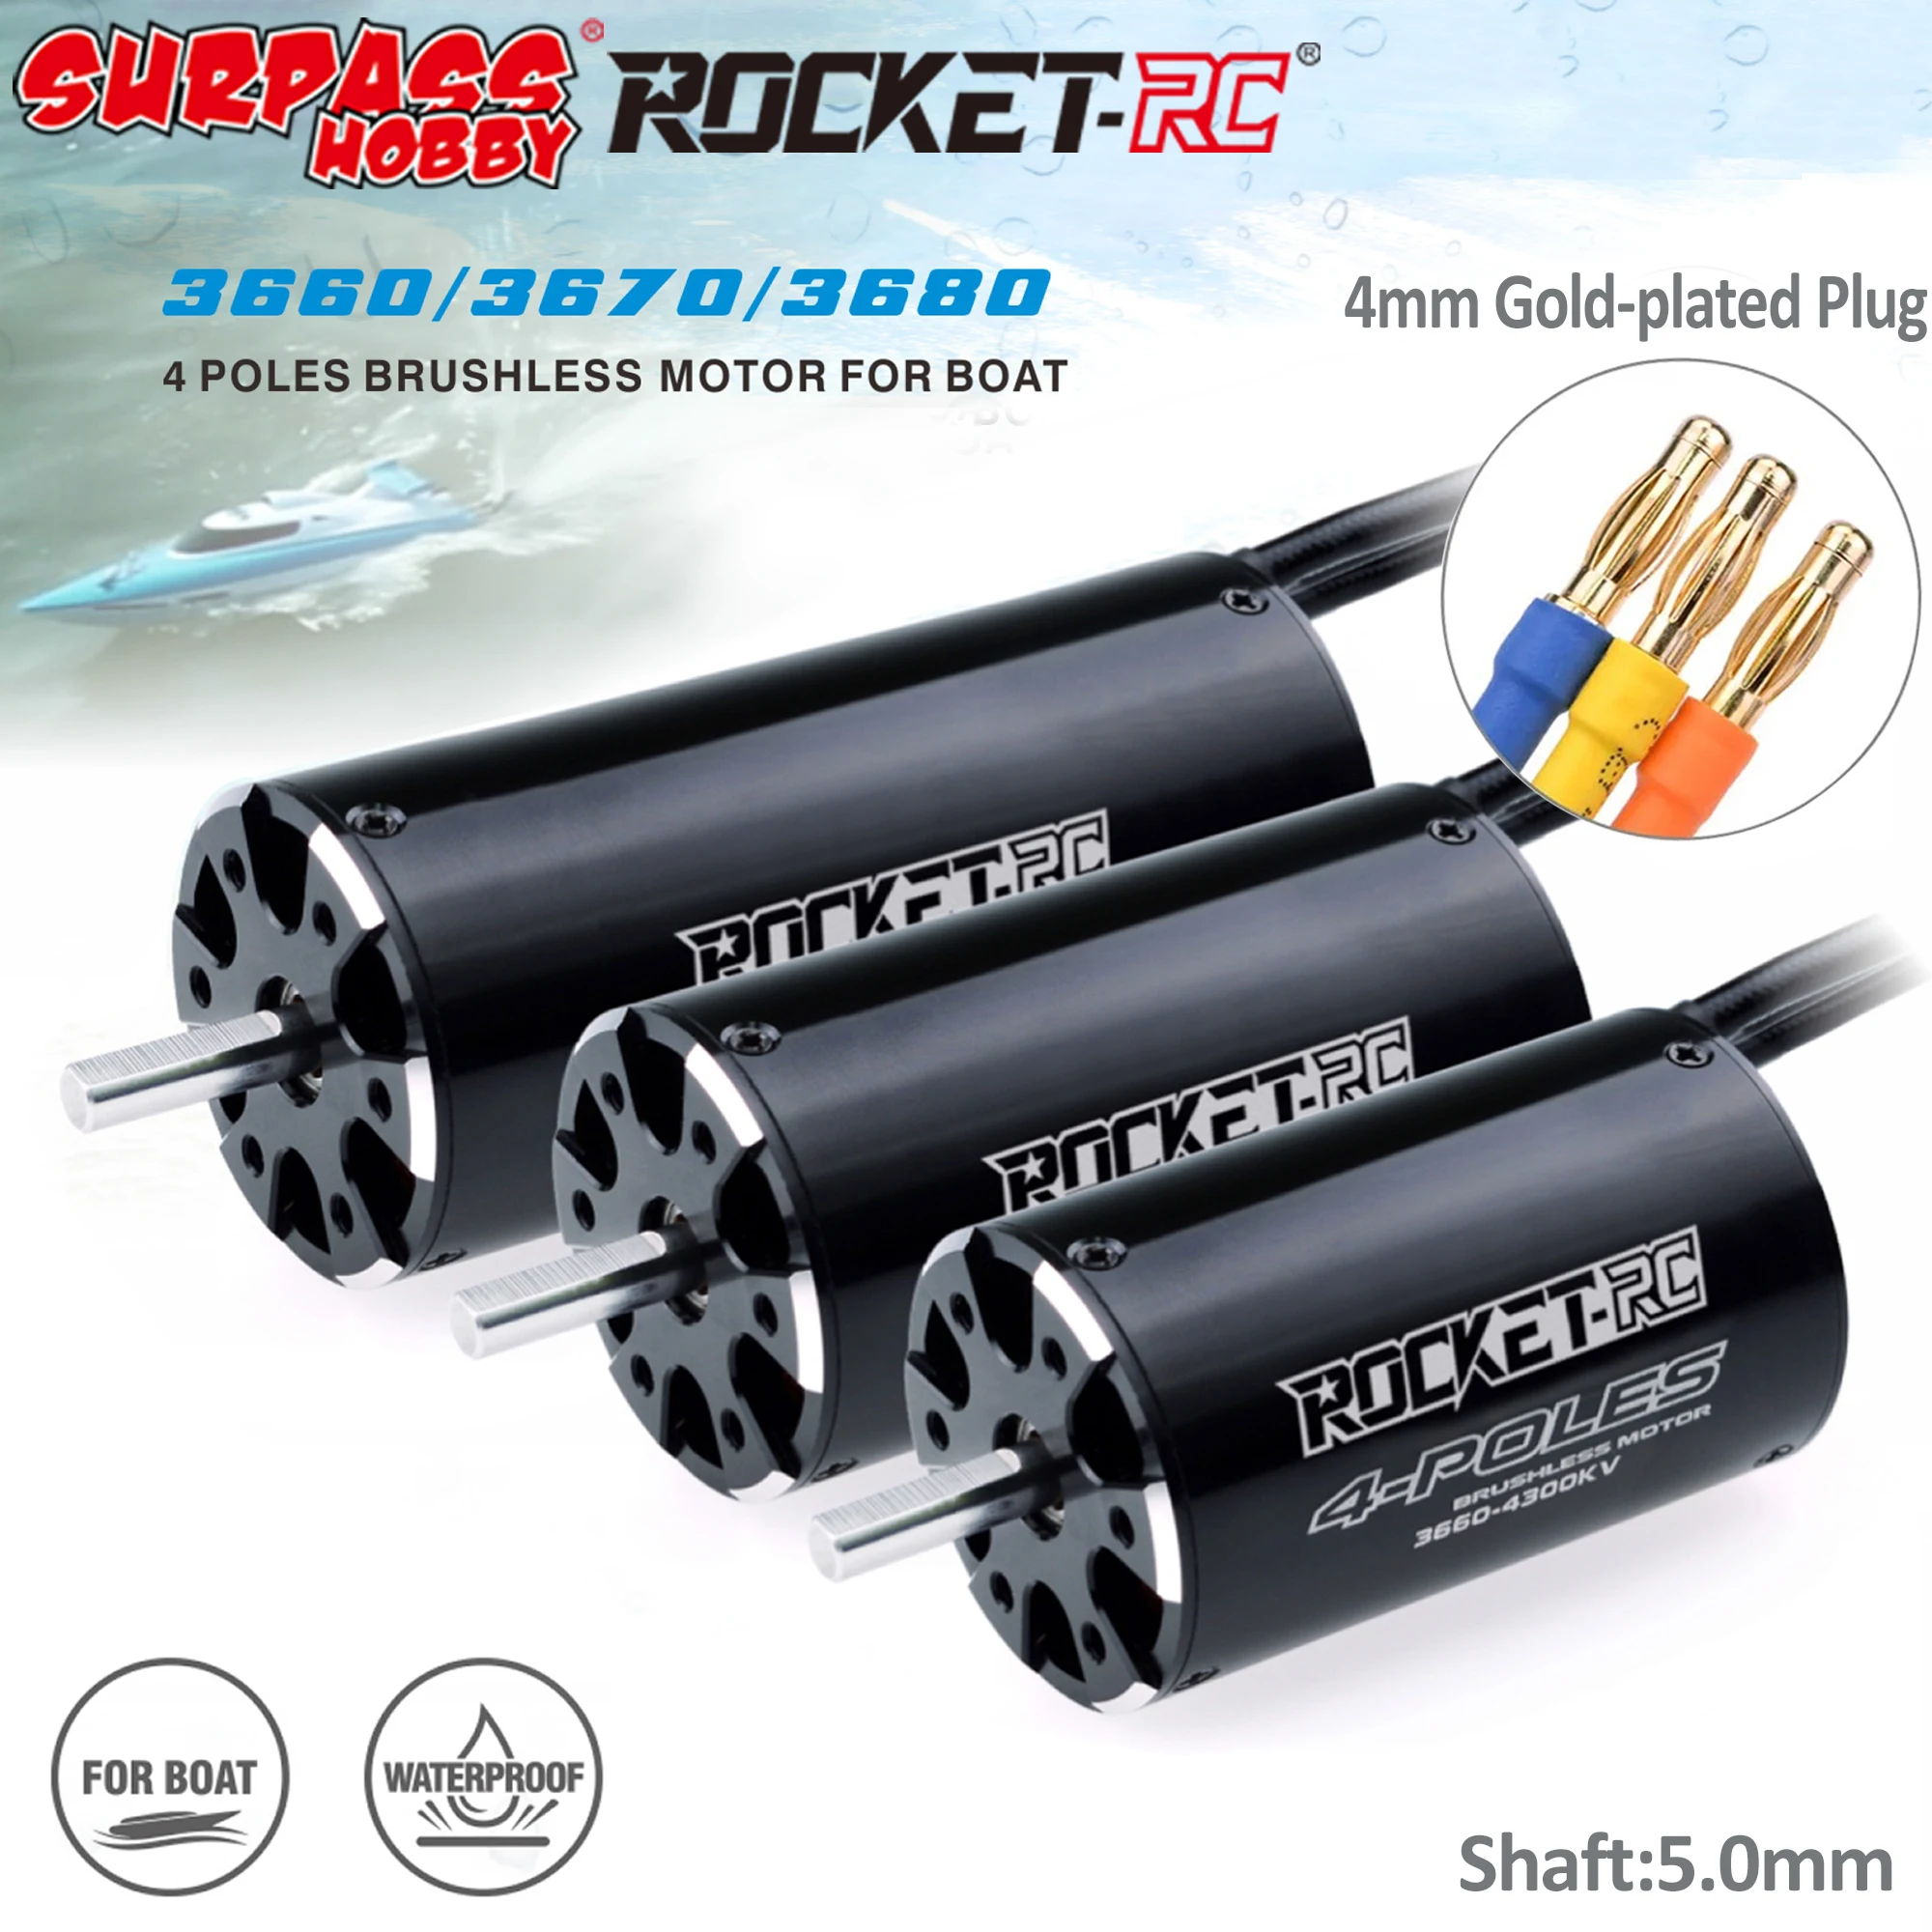 Surpass Hobby Rocket RC 3660 3670 3680 4mm Connector Brushless